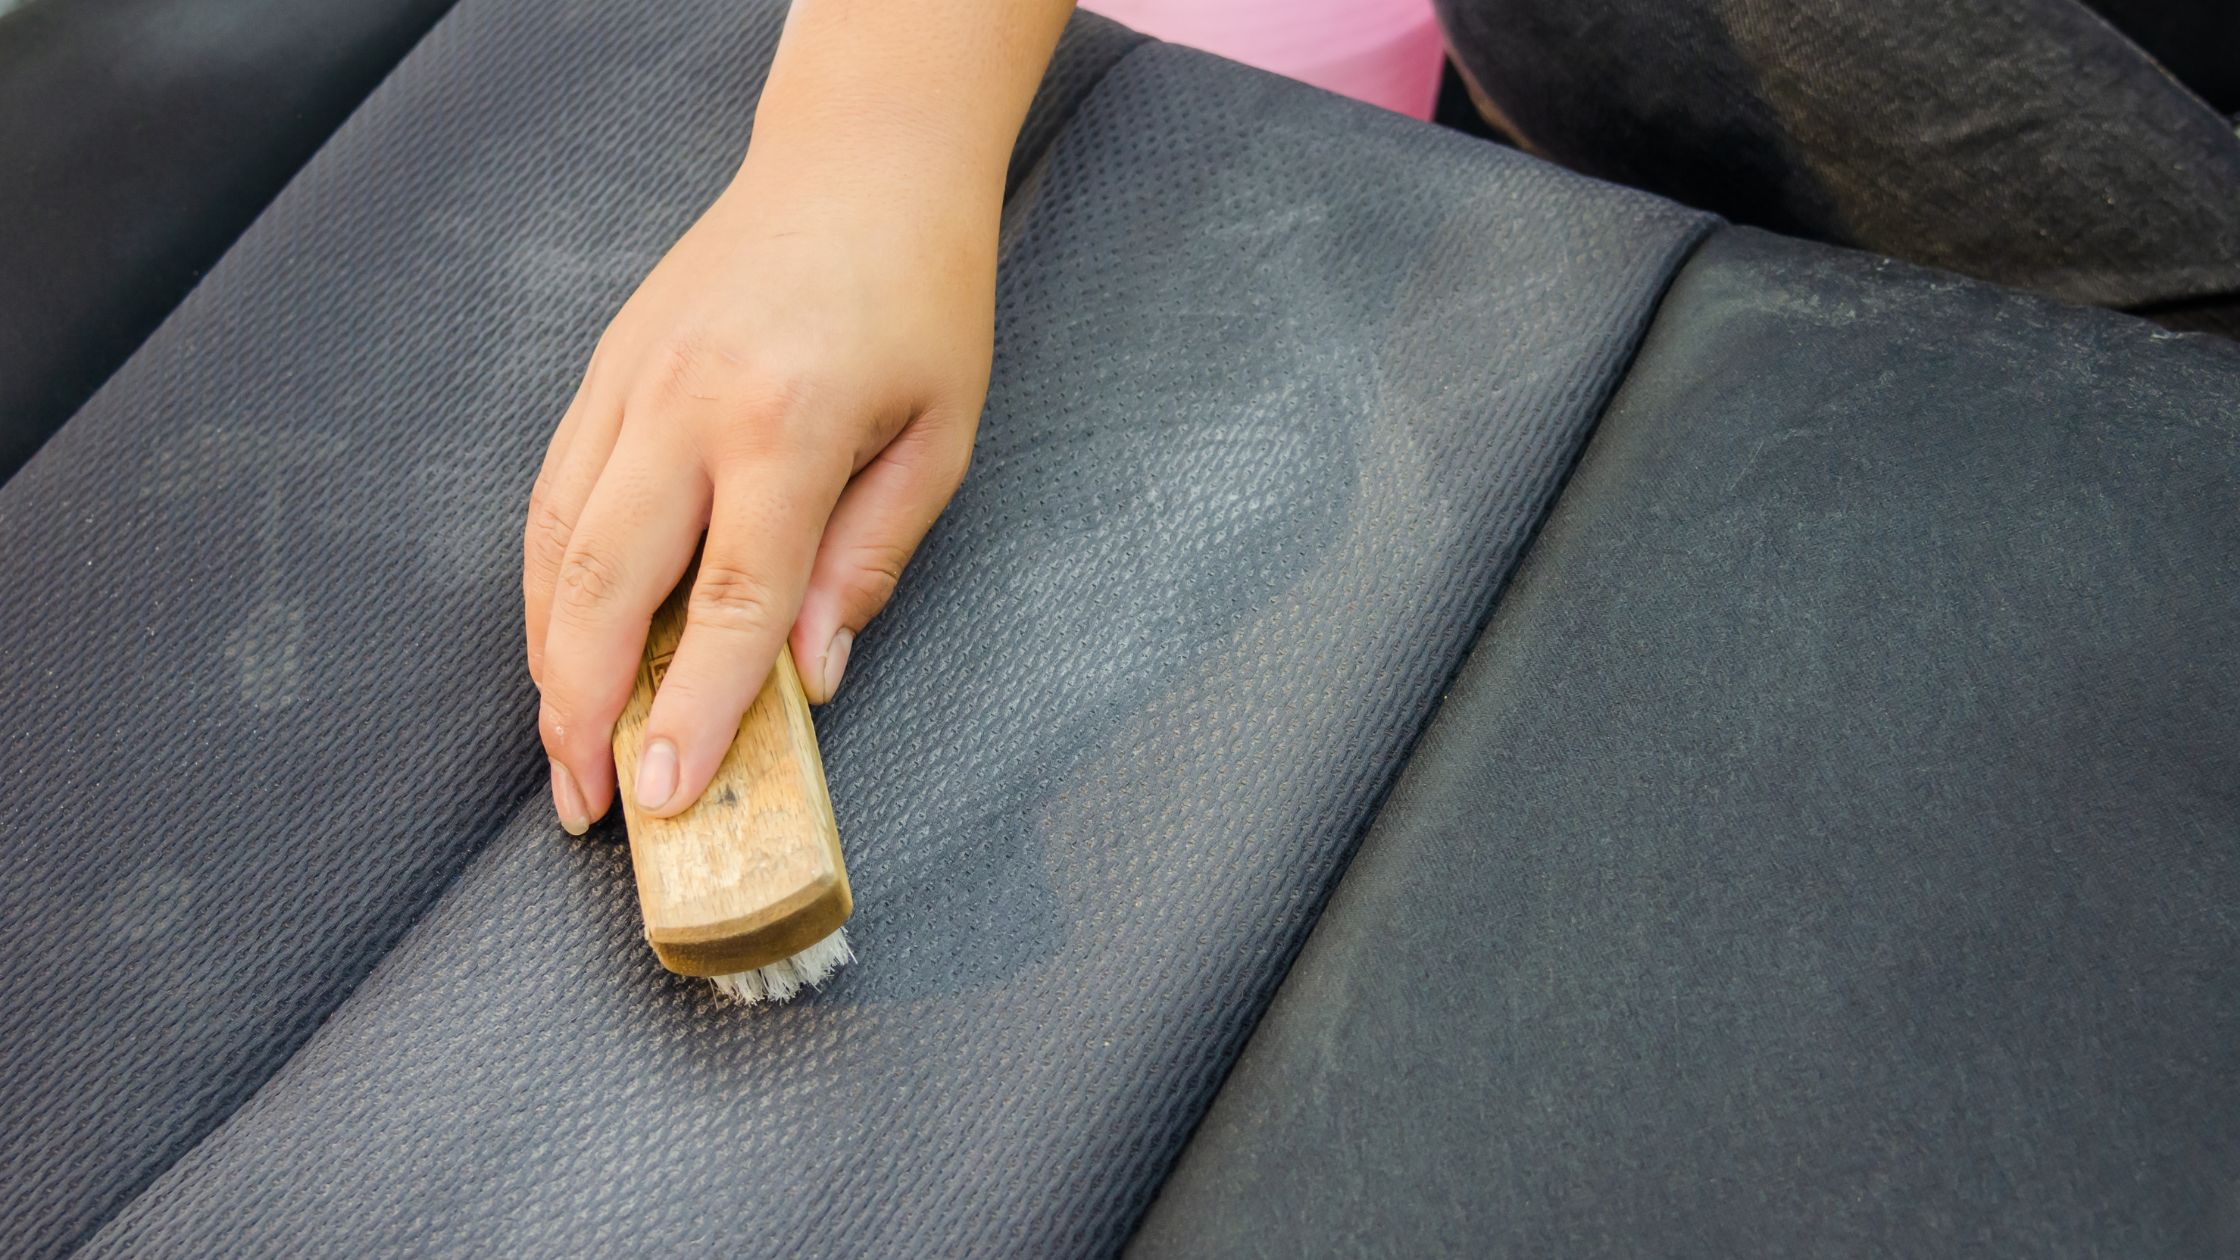 How to Clean Car Seats, Fabric, Leather and Vinyl